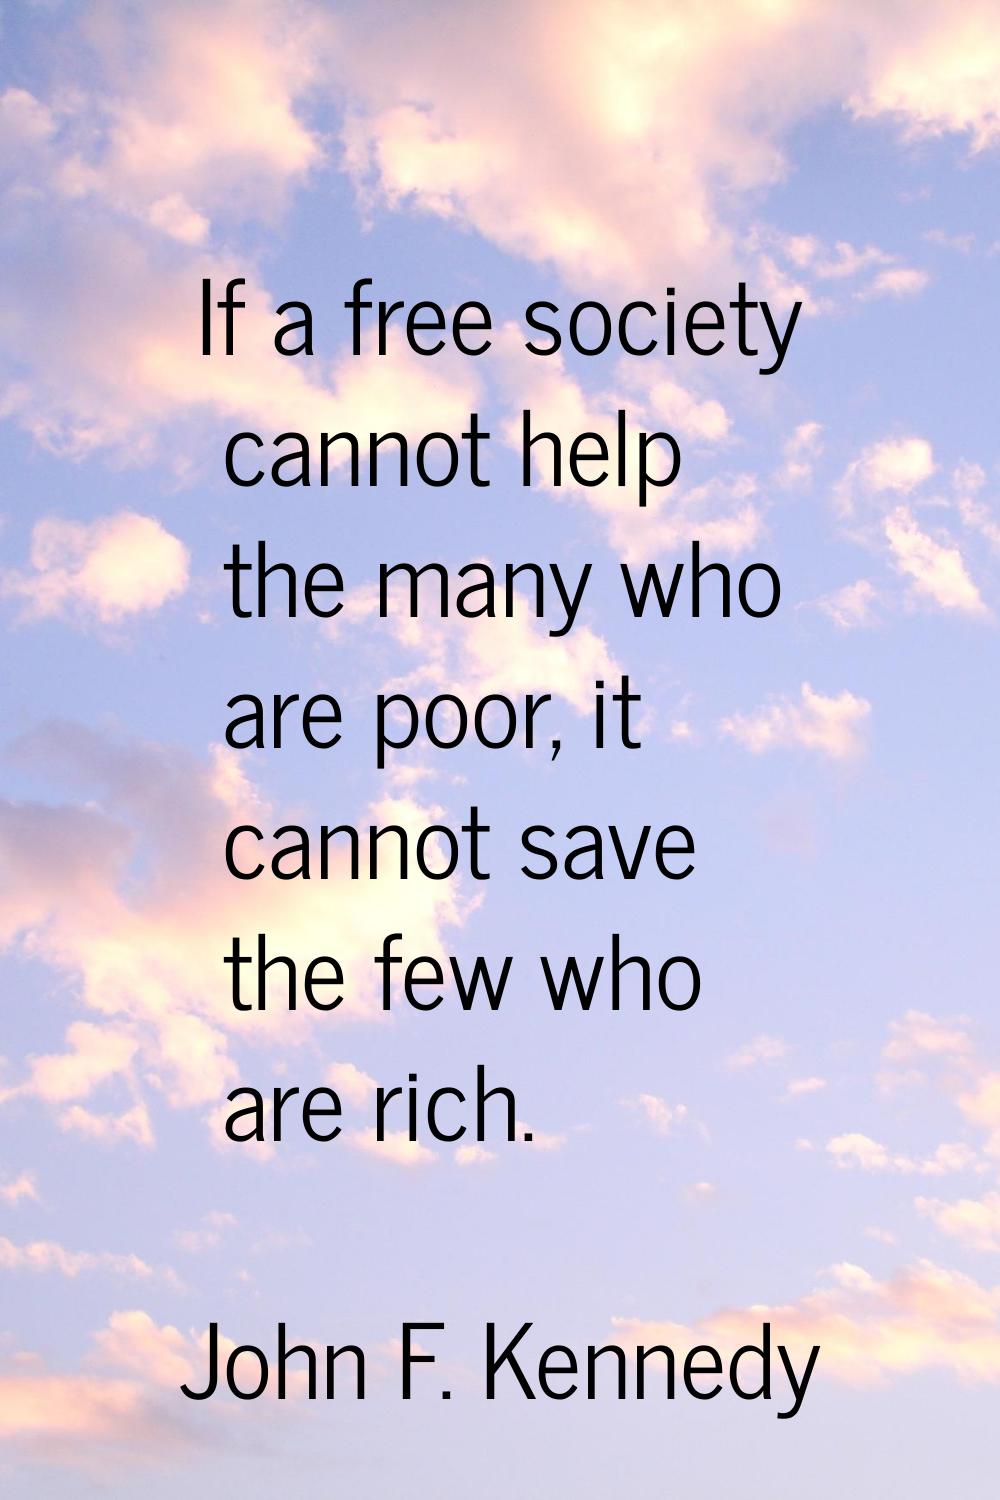 If a free society cannot help the many who are poor, it cannot save the few who are rich.